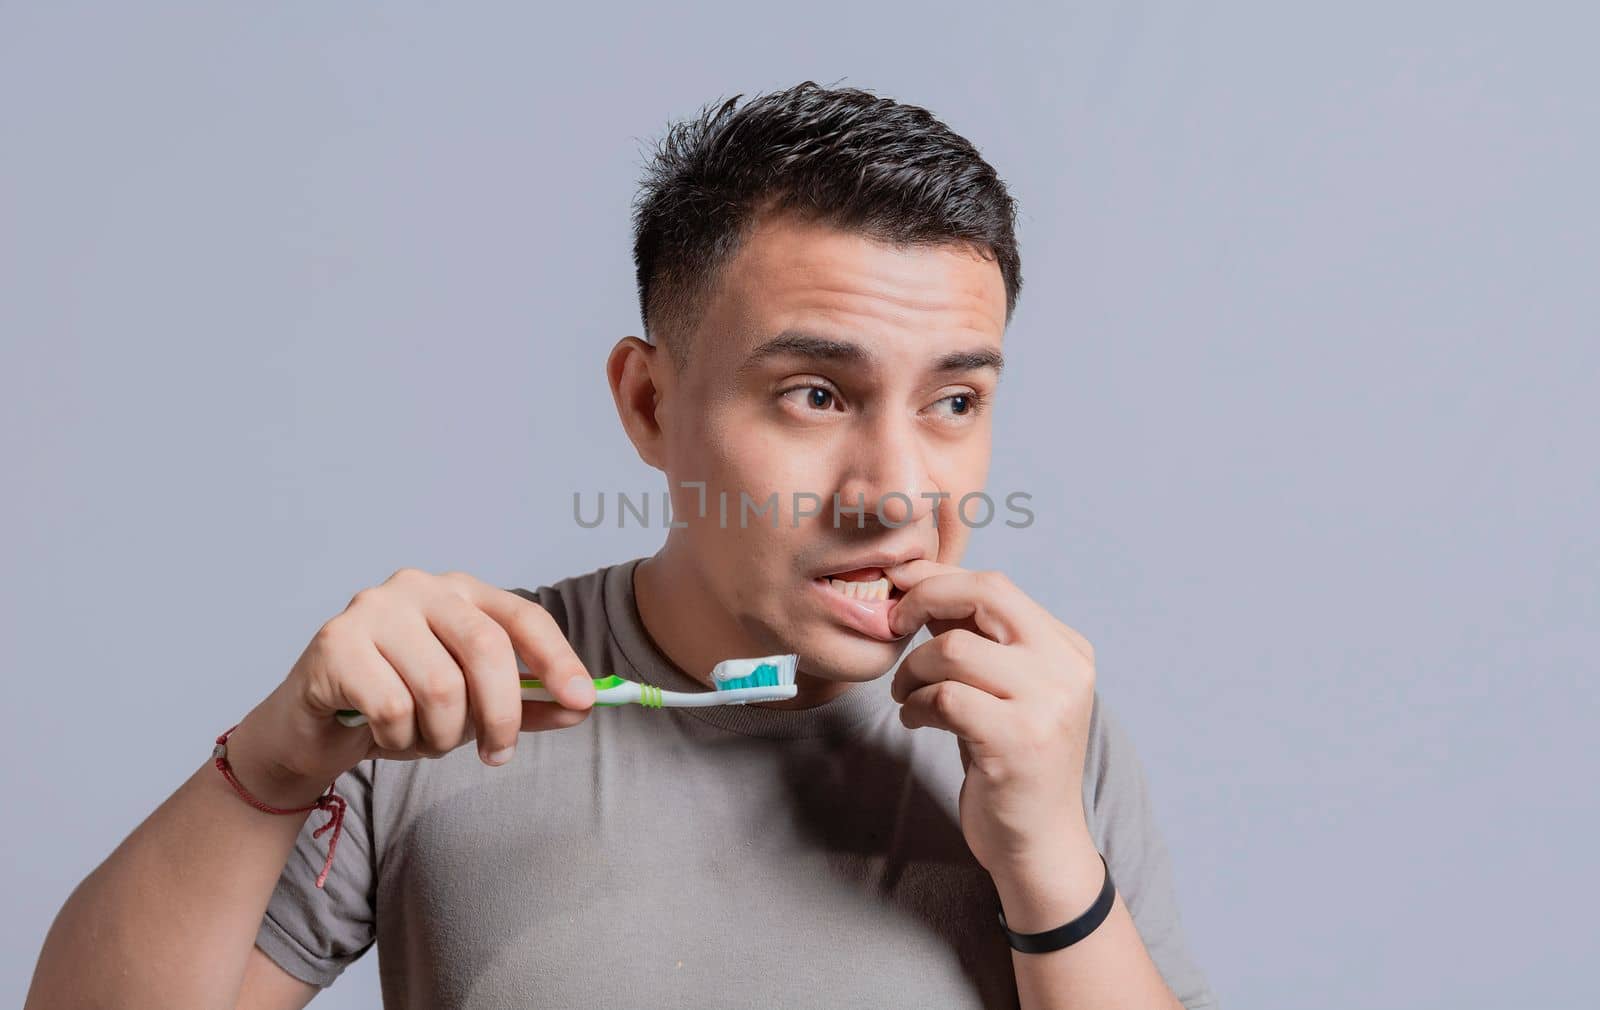 Young man with gingivitis holding toothbrush. People holding toothbrush with gum pain, Man holding toothbrush with gum pain, People holding toothbrush with gum problem isolated by isaiphoto